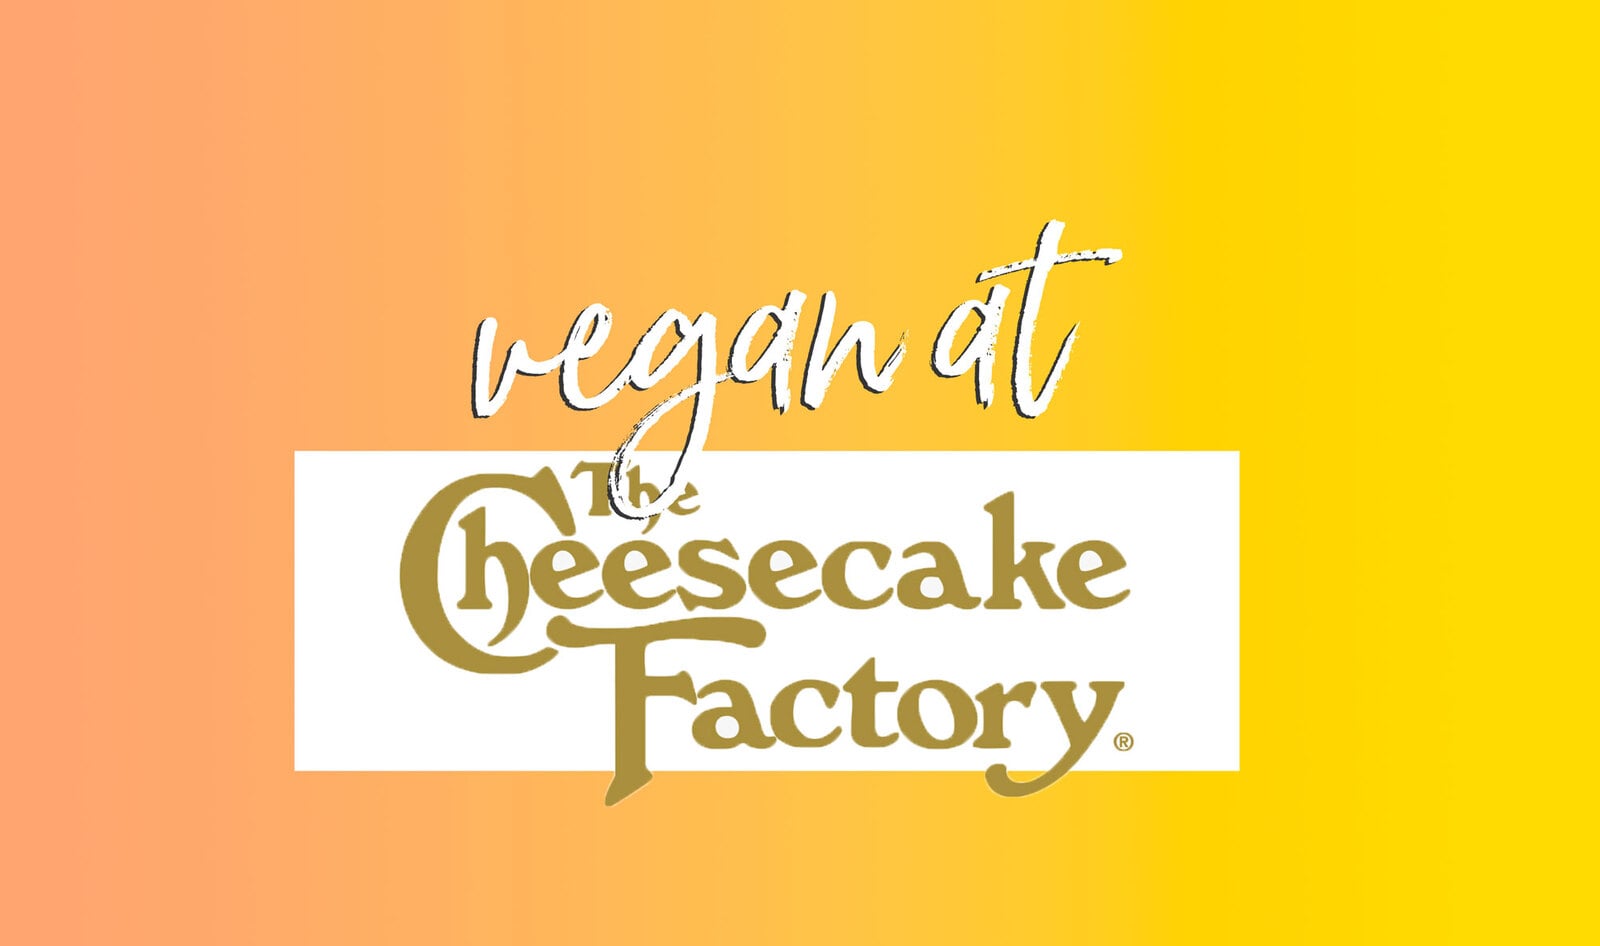 The Vegan Guide to the Cheesecake Factory